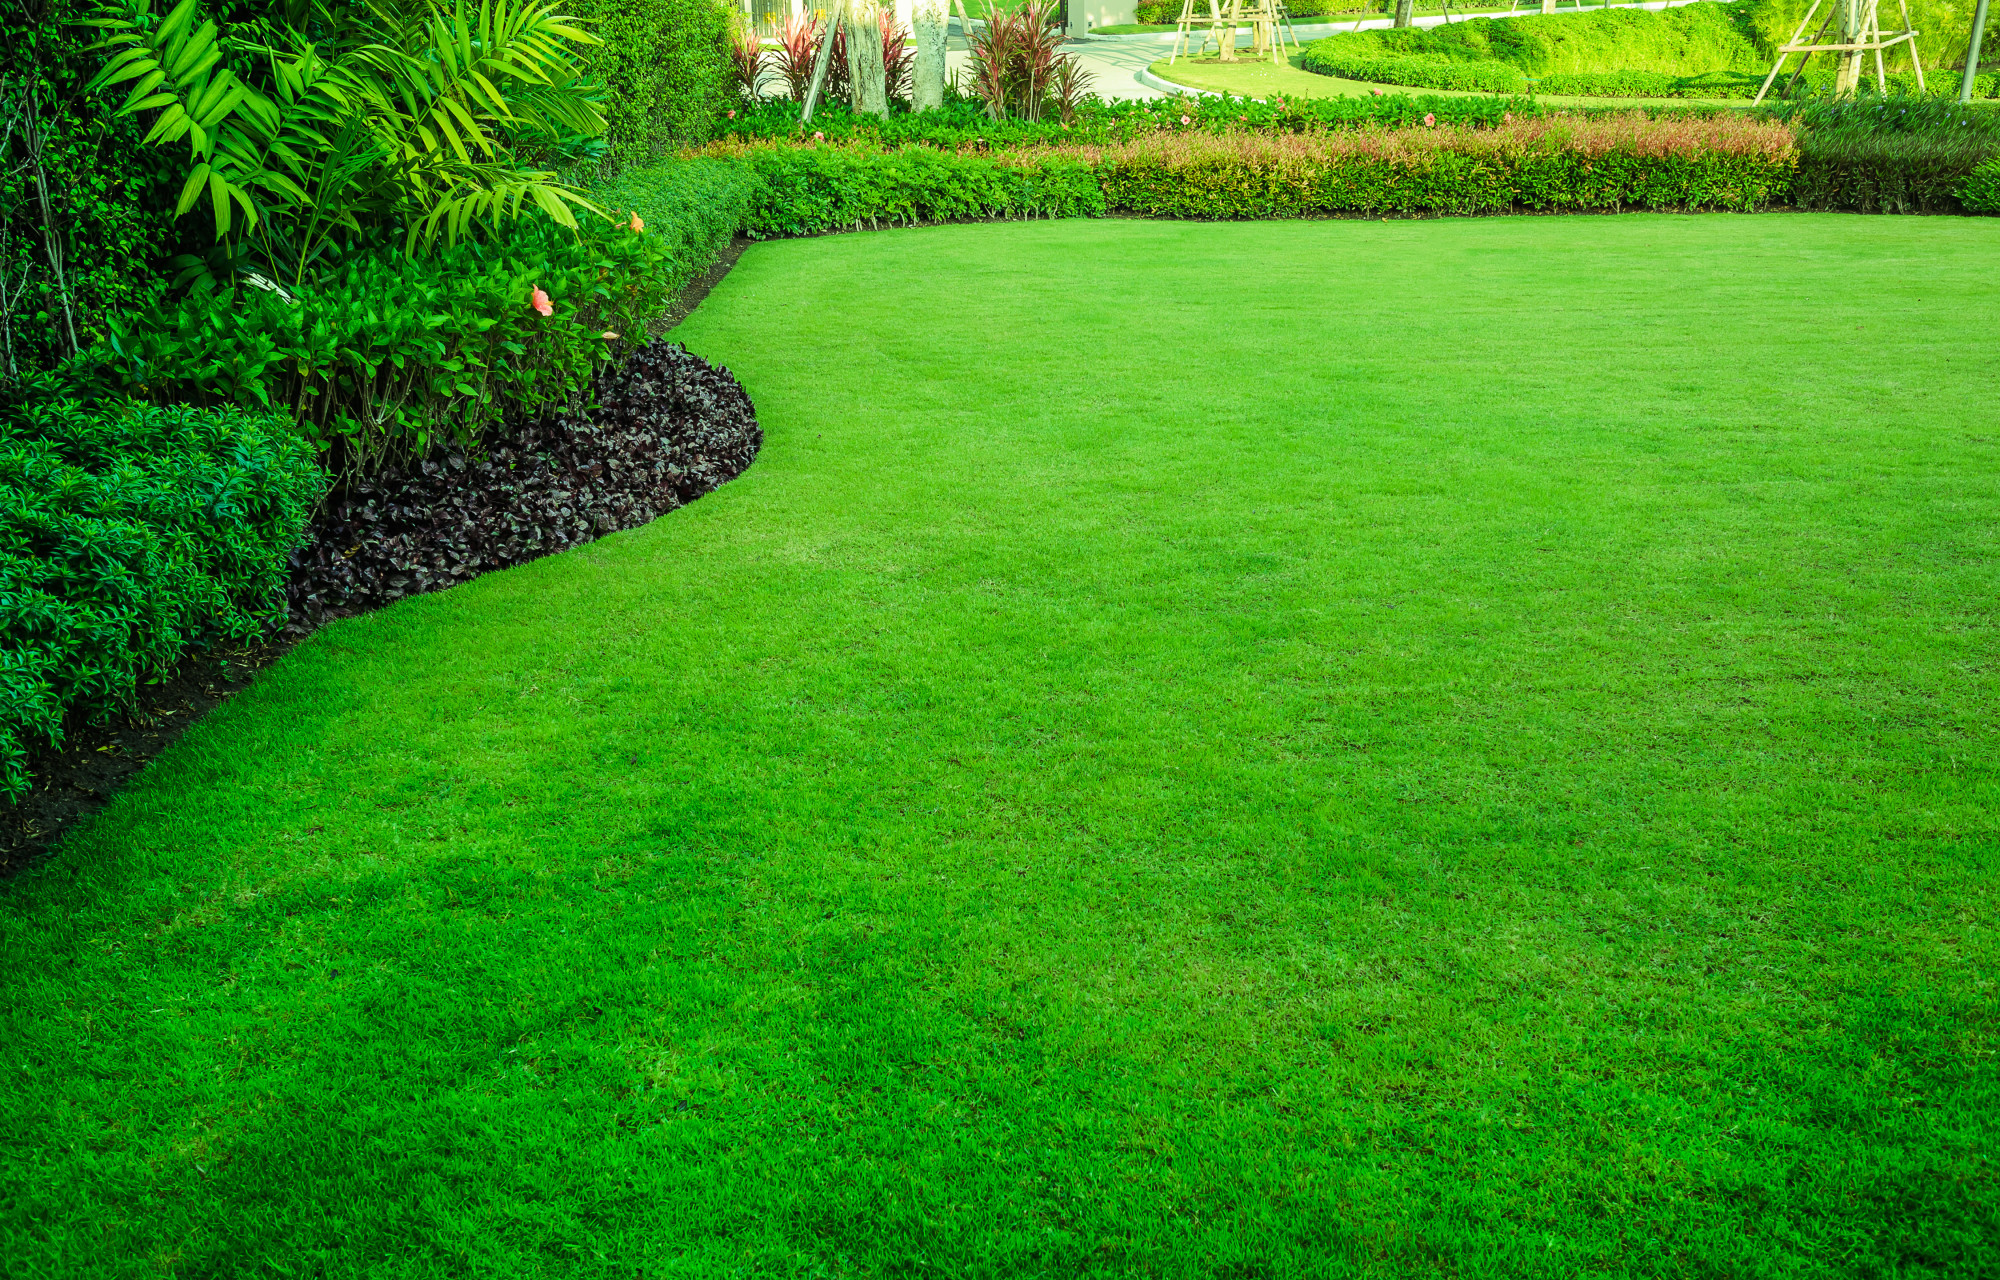 How to Get a Green Lawn: 5 Ways to Really Get Greener Grass